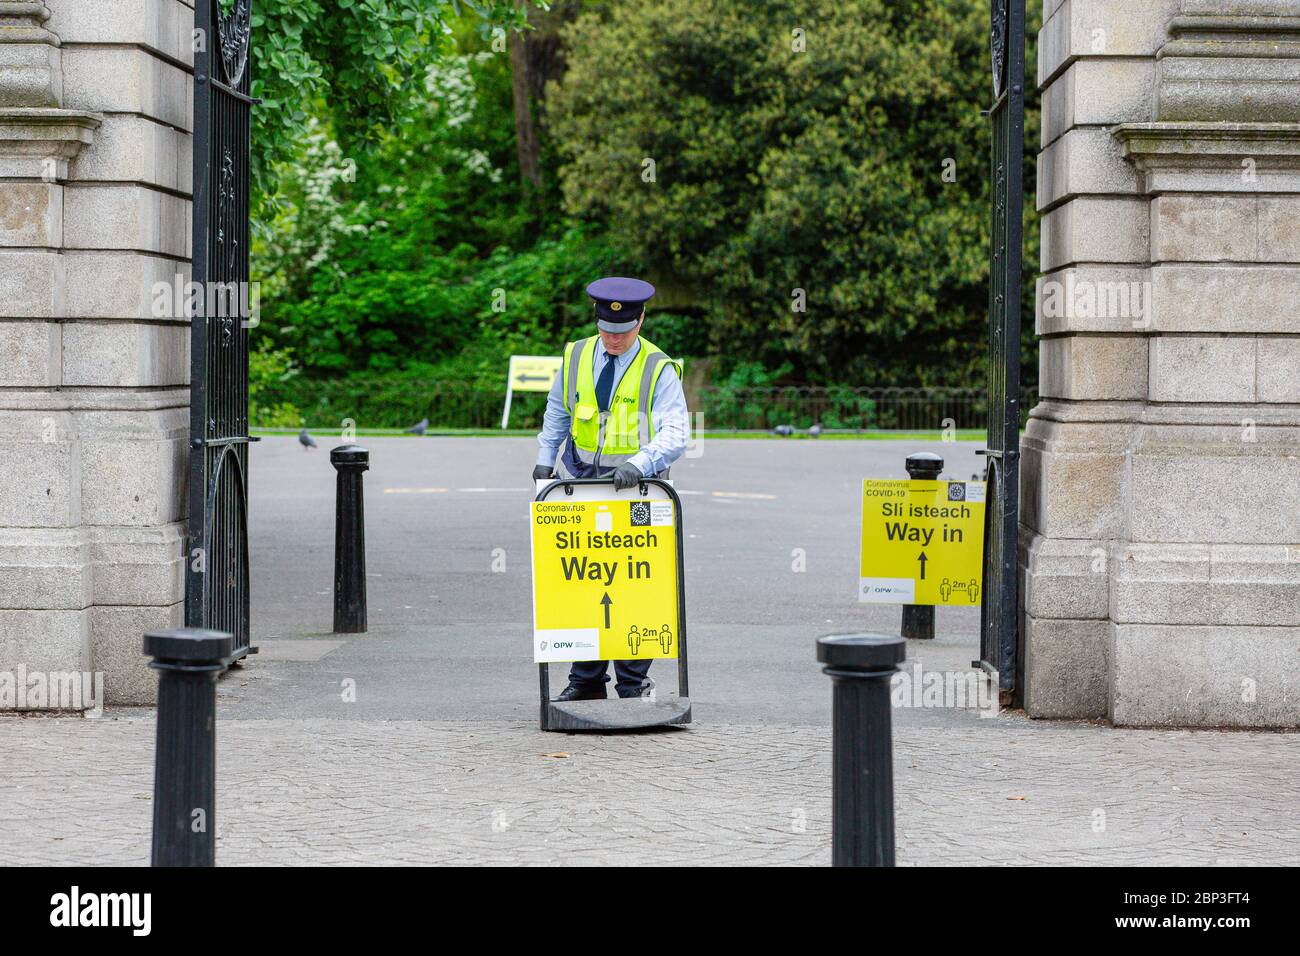 Dublin, Ireland. May 2020. Warden setting up Yellow Coronavirus Covid-19 safety signage at the entrance to the St Stephen's Green Park in Dublin. Stock Photo